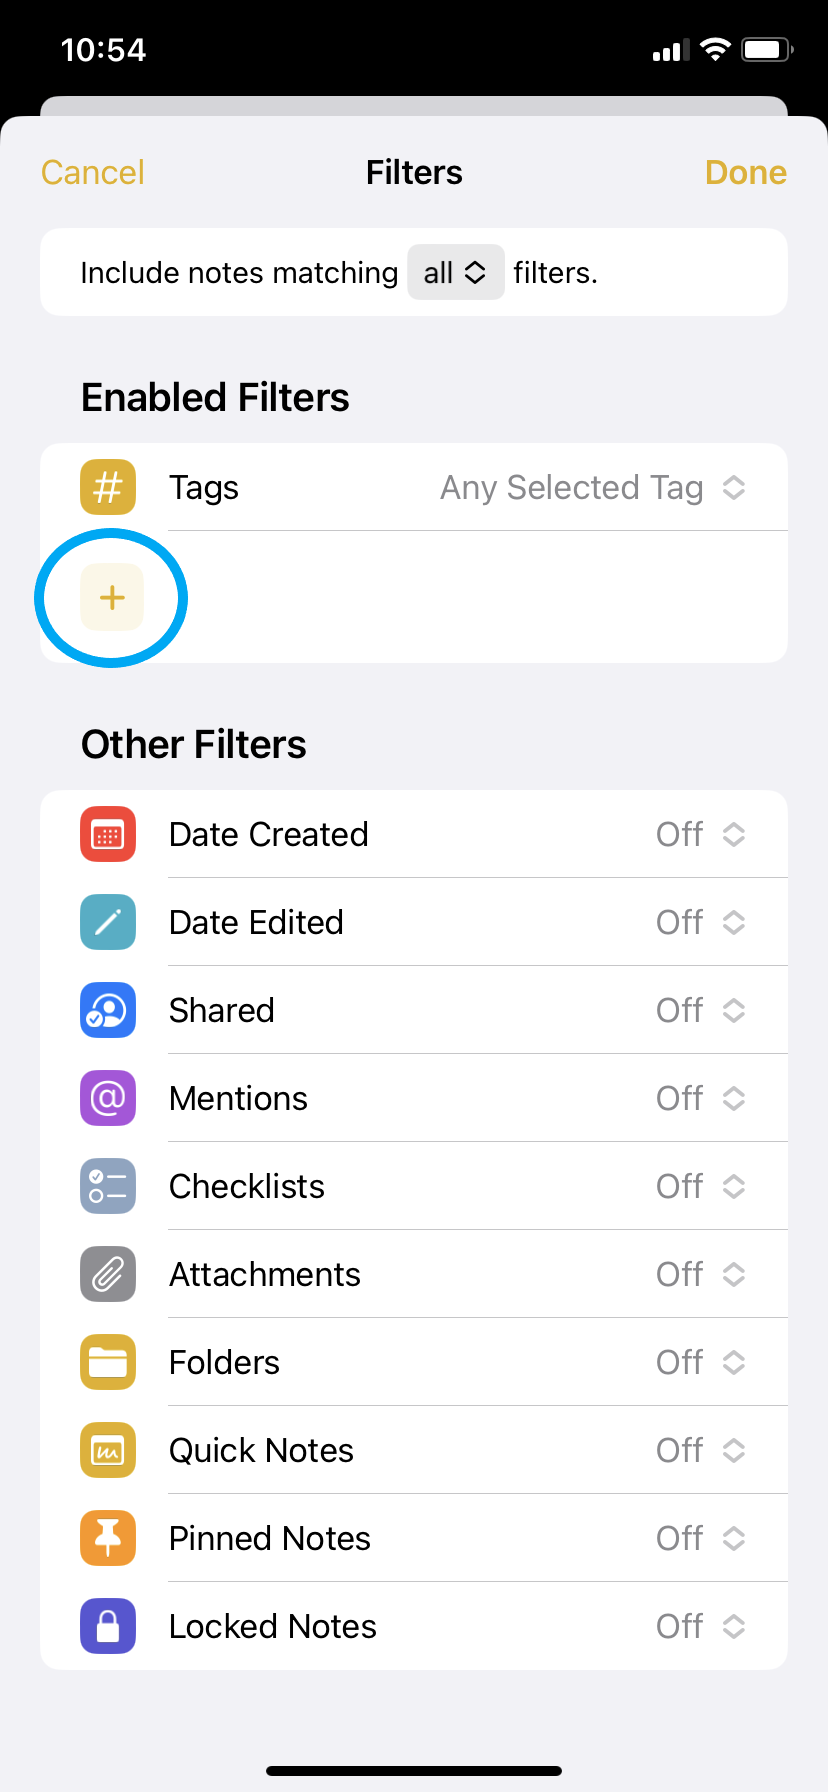 How to use Smart Folders in the iOS Notes app